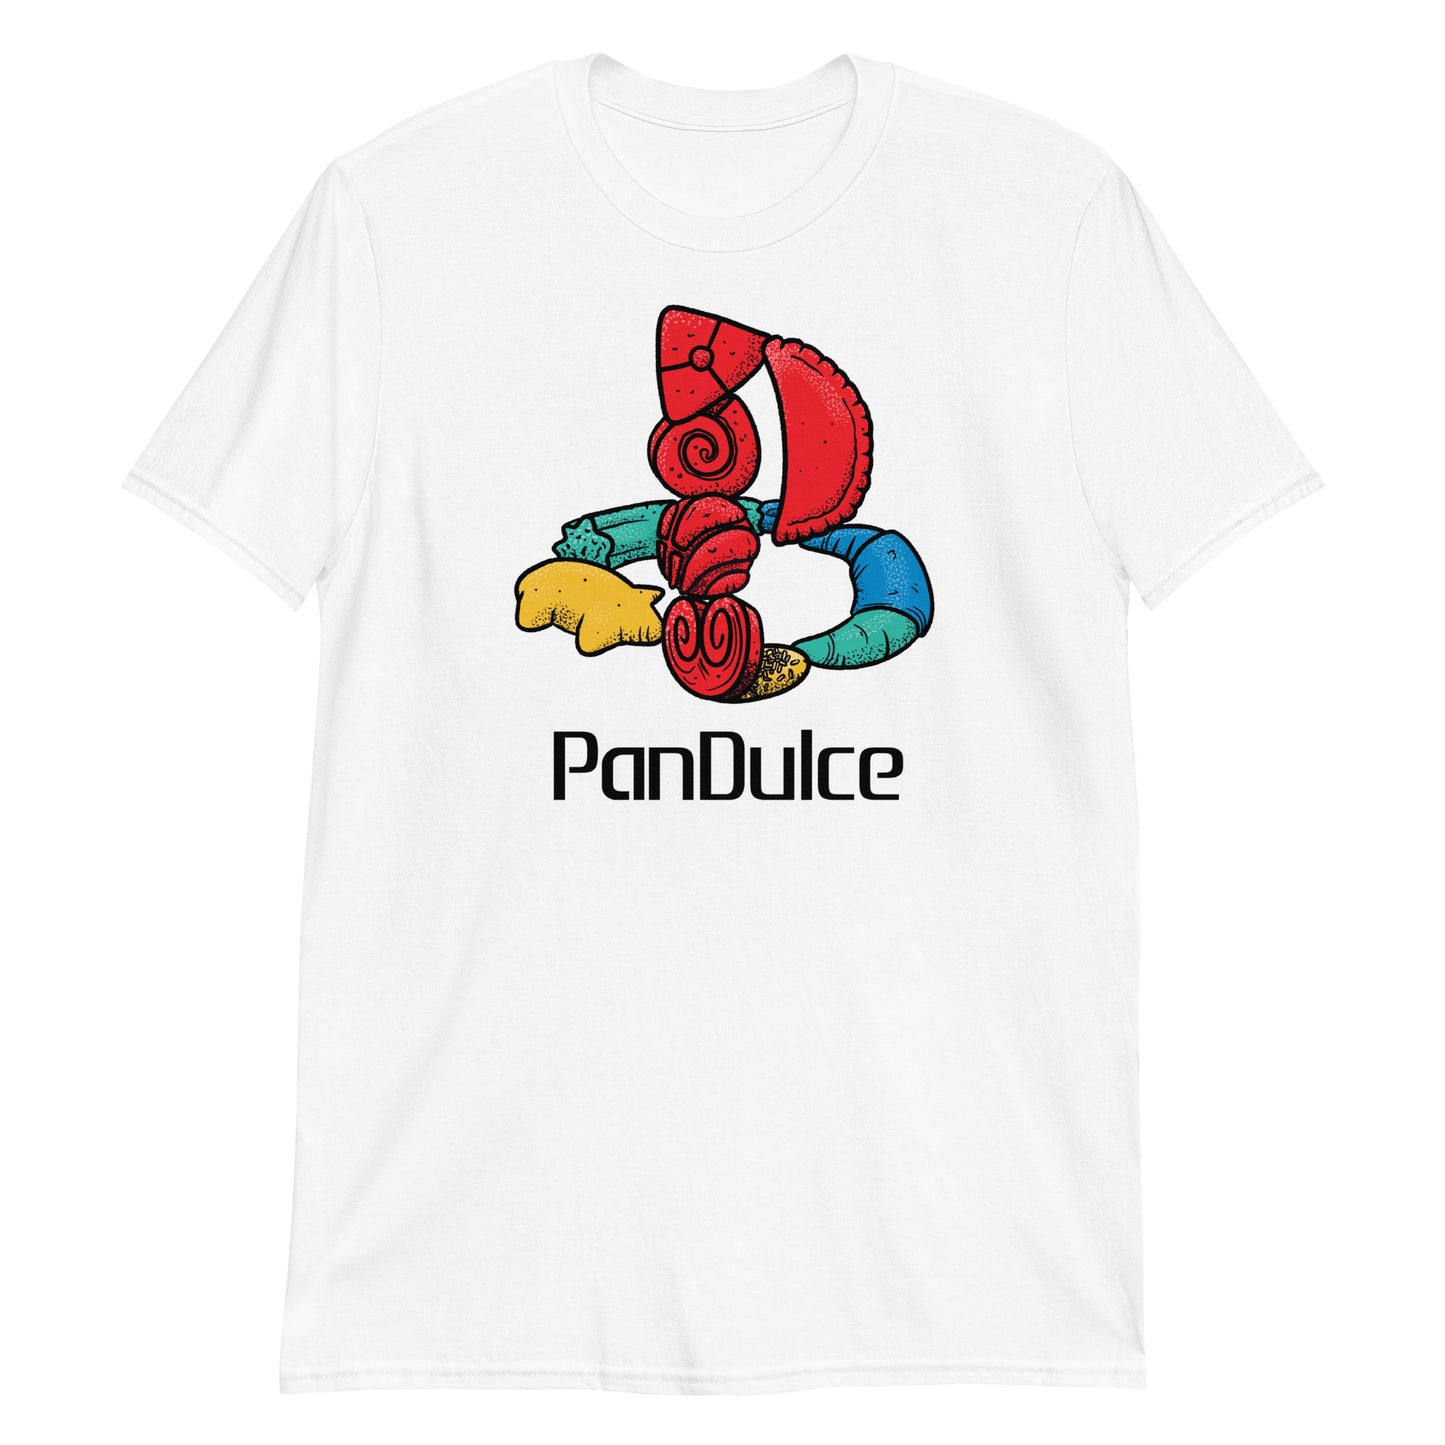 Pan Dulce Retro Gaming on White or Grey Cool Mexican Food T-shirt